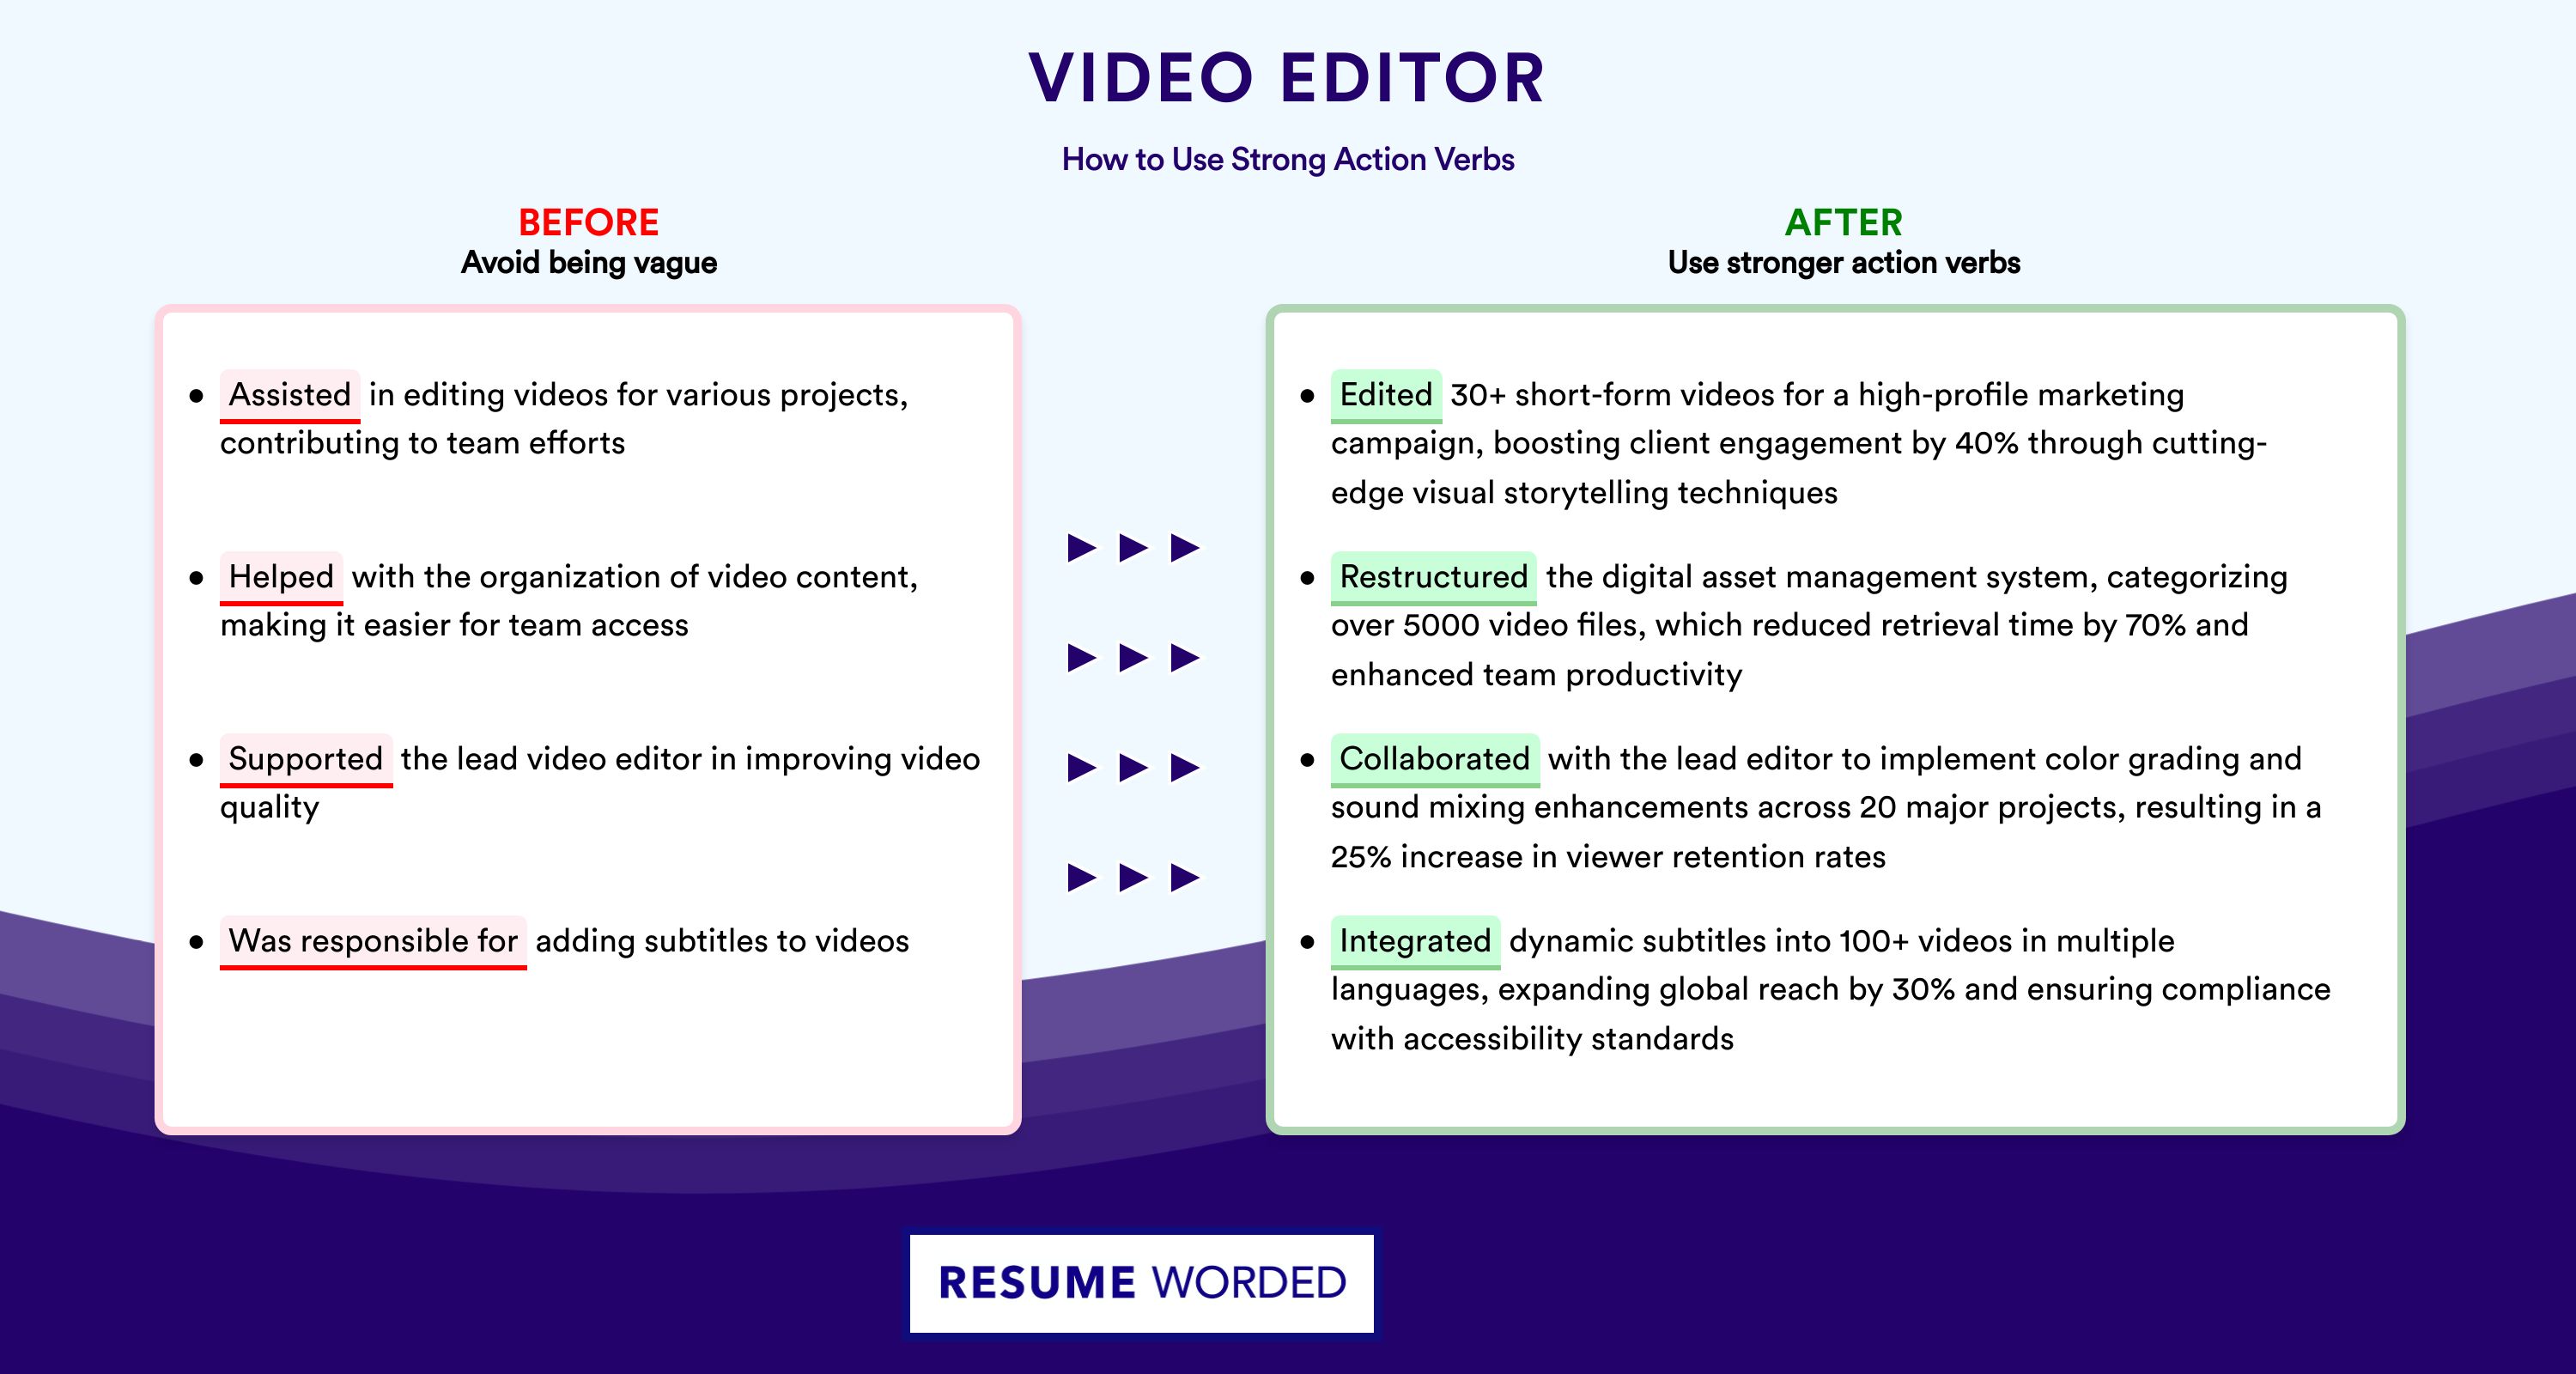 Action Verbs for Video Editor